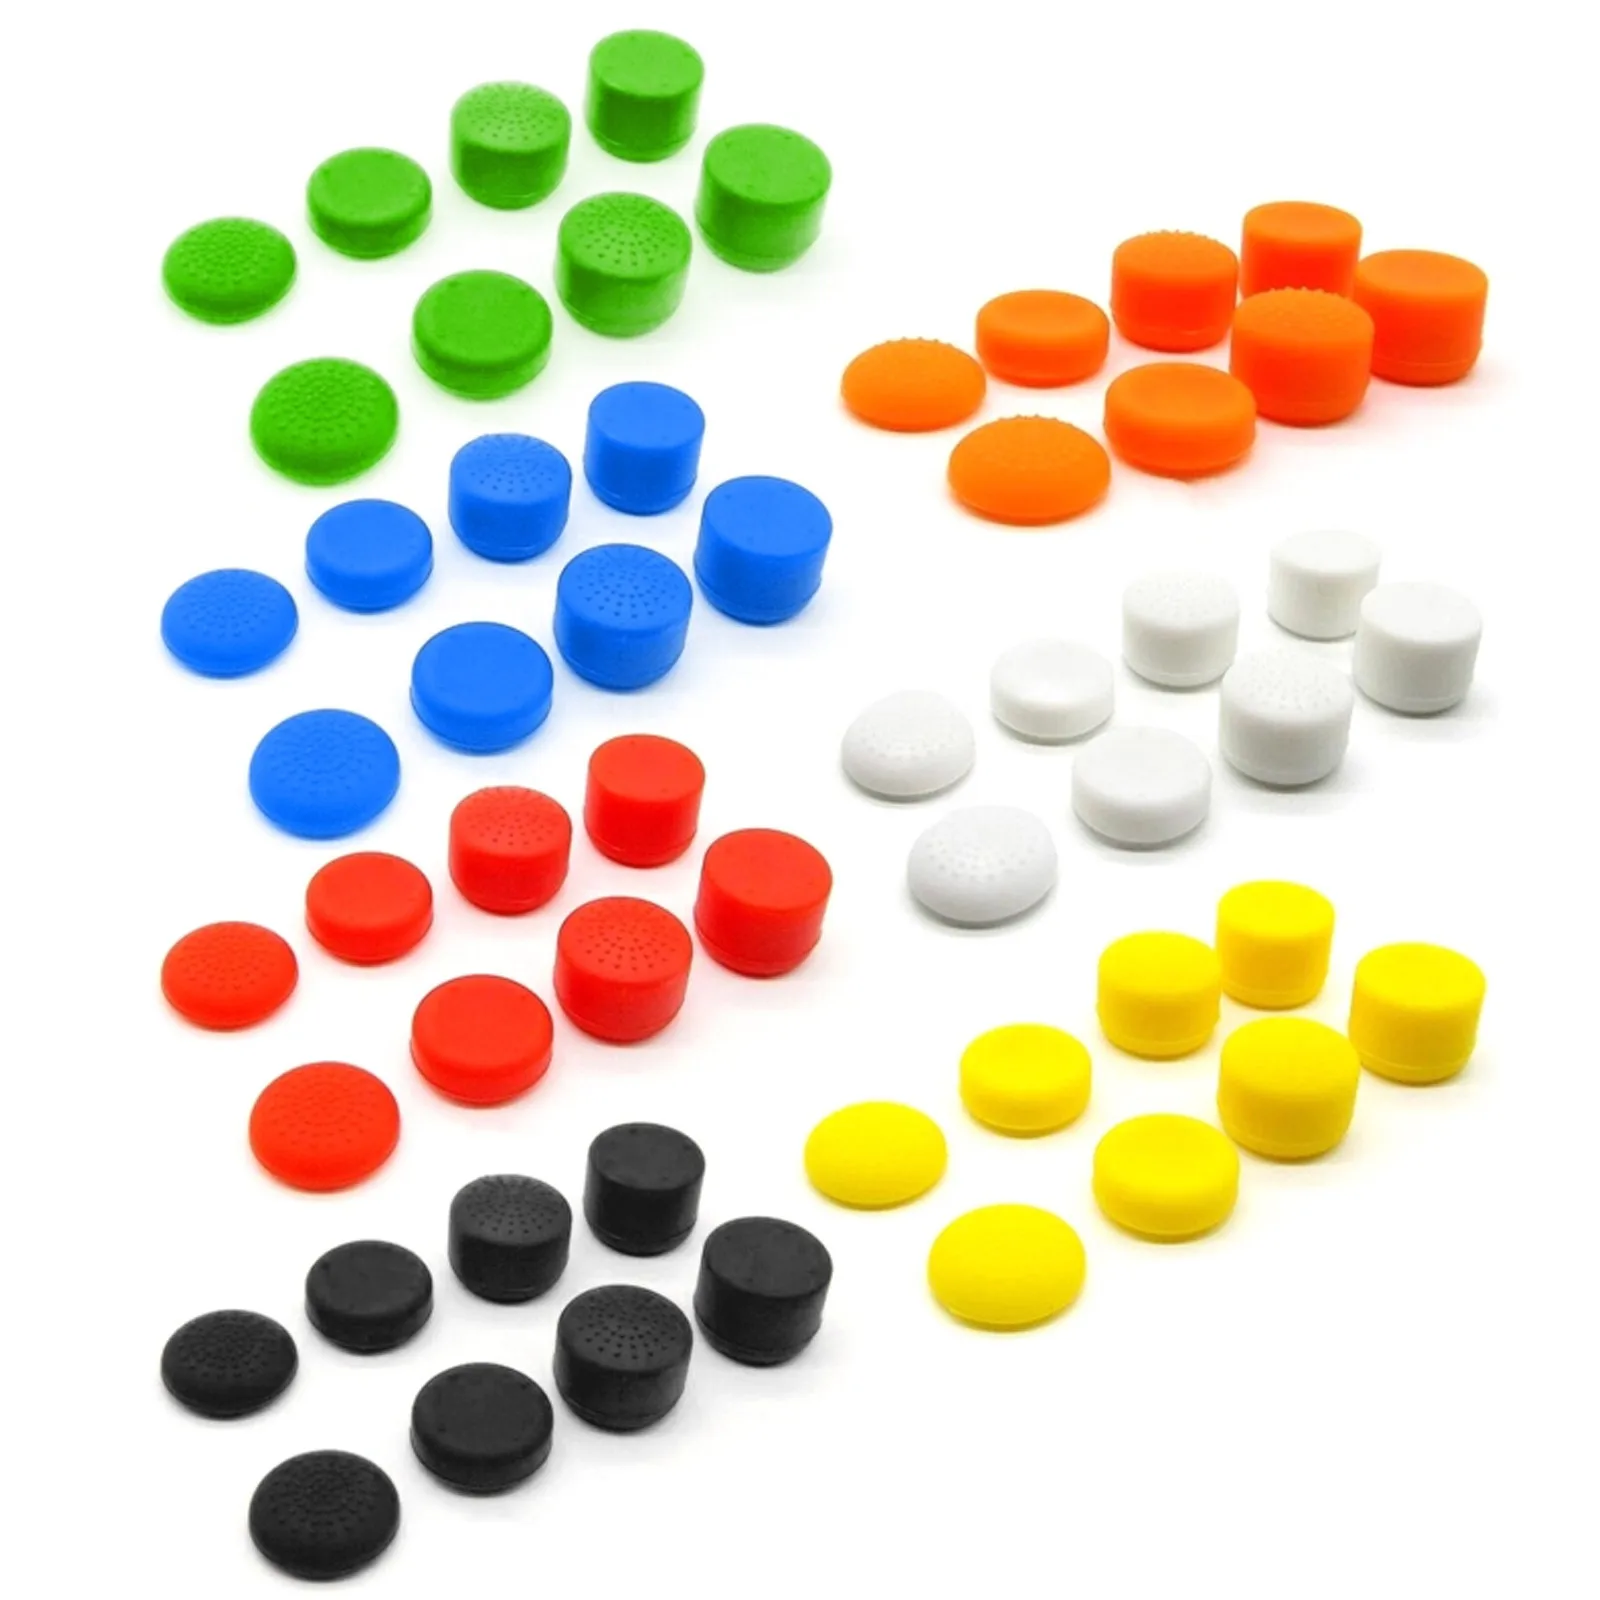 

Bevigac 8PCS Non-slip Soft Silicone Thumbstick Joystick Thumb Grip Cap Cover Protector for Sony PlayStation 4 5 PS5 Controller